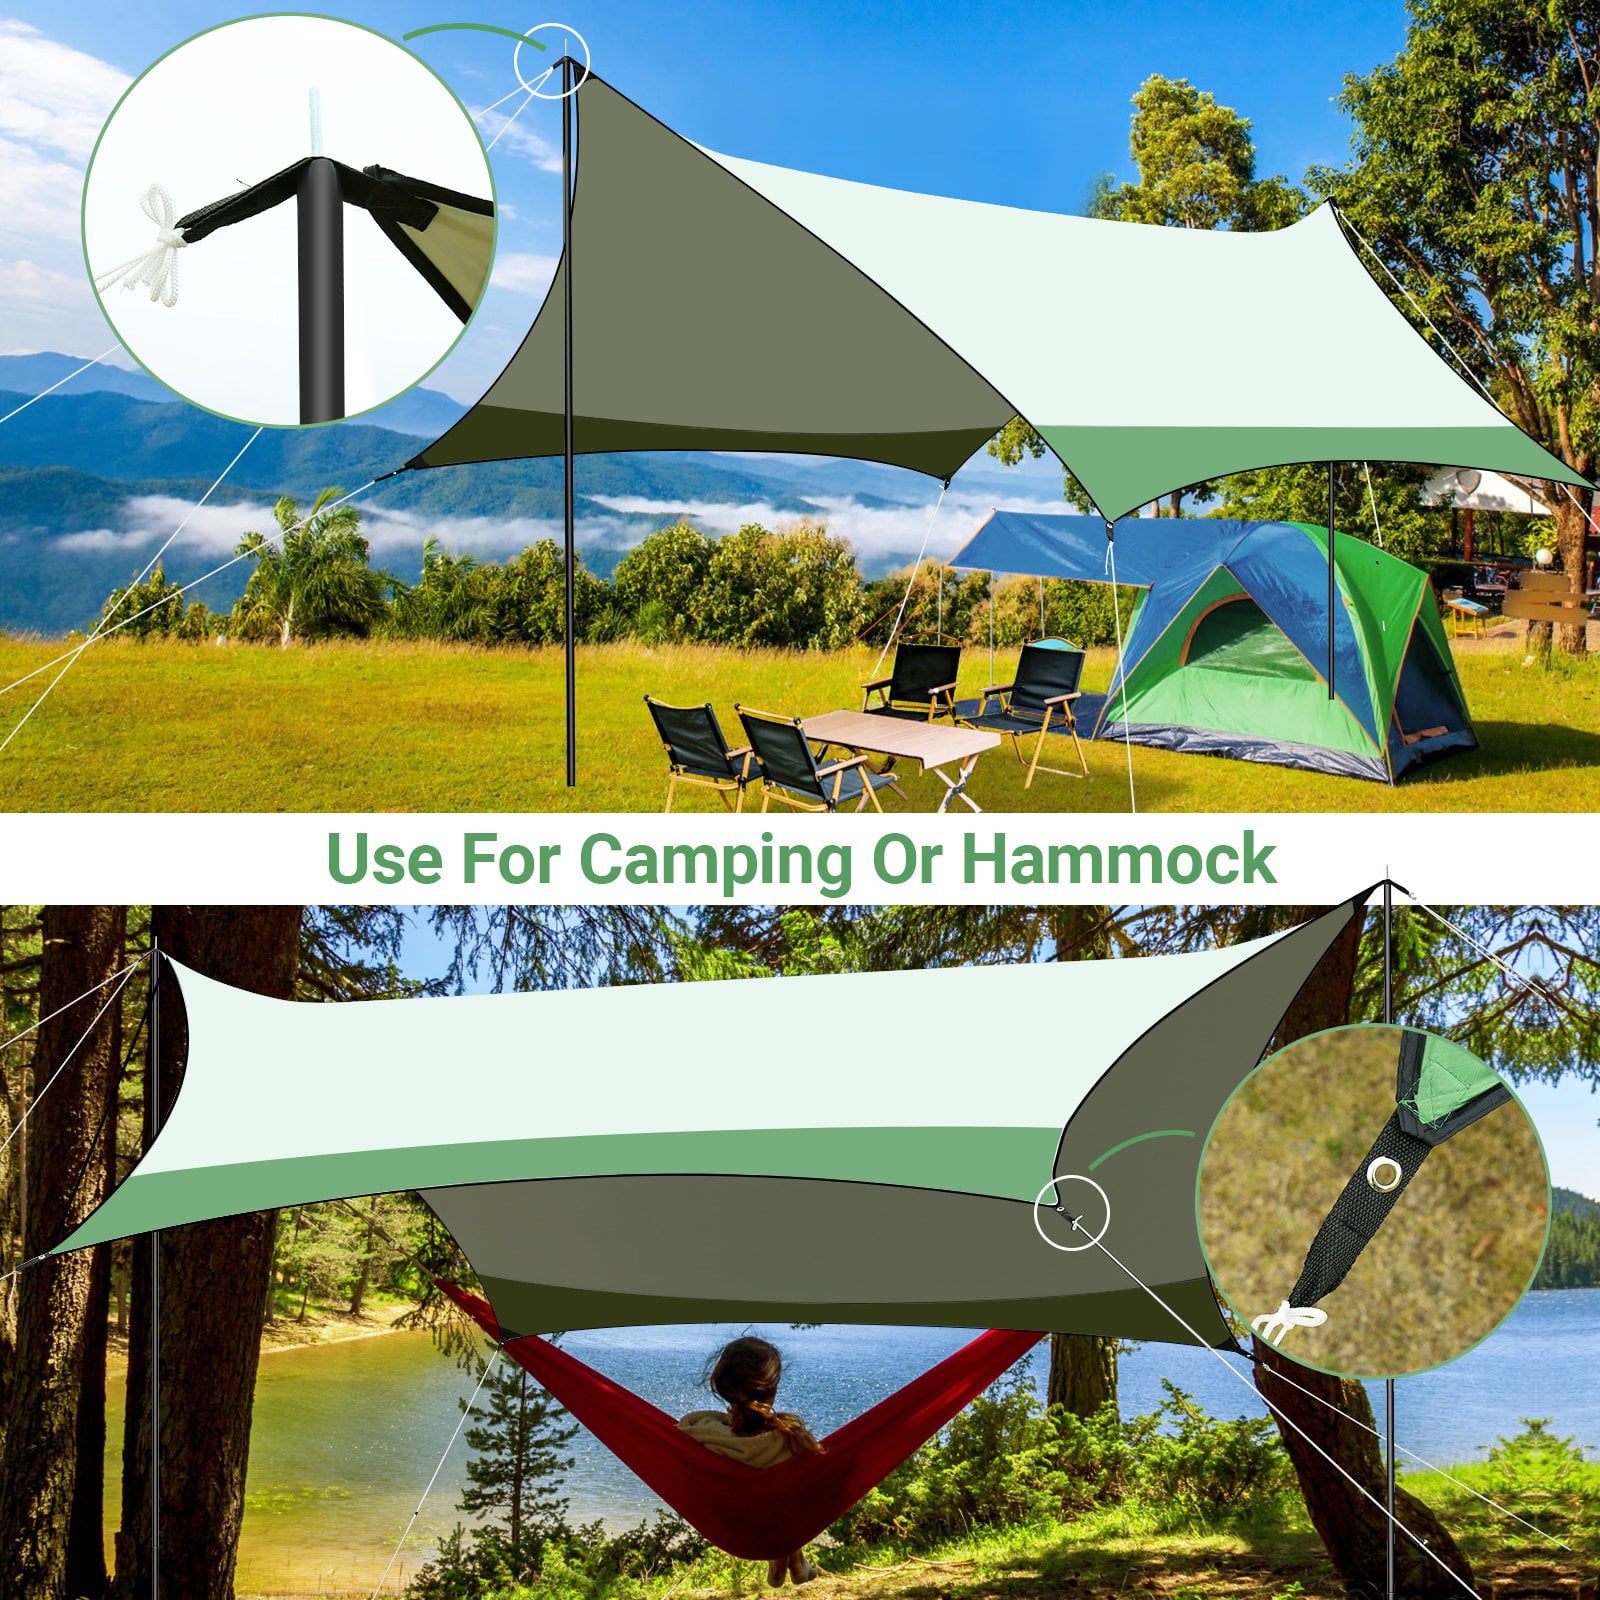 12 x 14ft Camping Tent Tarp Waterproof UPF 50+ Hammock Rain Fly with 2 Poles Outdoor Camping Accessories Tarp Shelter Lightweight and Compact for Backpacking, Hiking, Traveling, Green